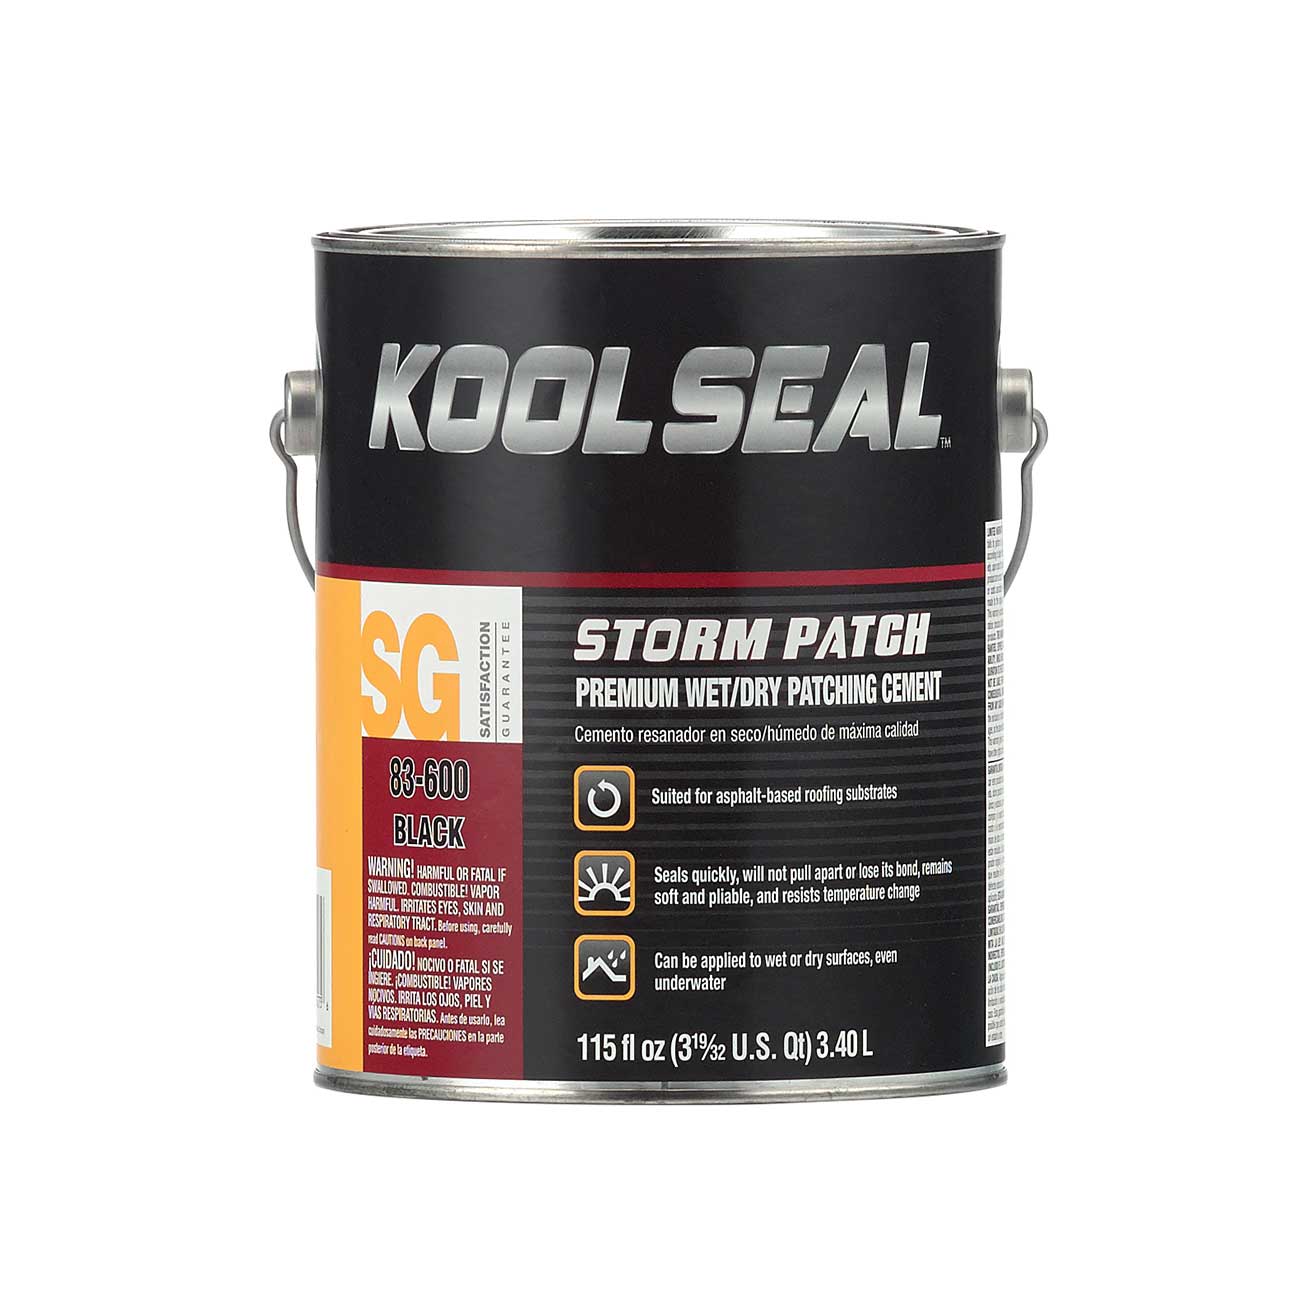 Kool Seal SP Premium Wet/Dry Patching Cement